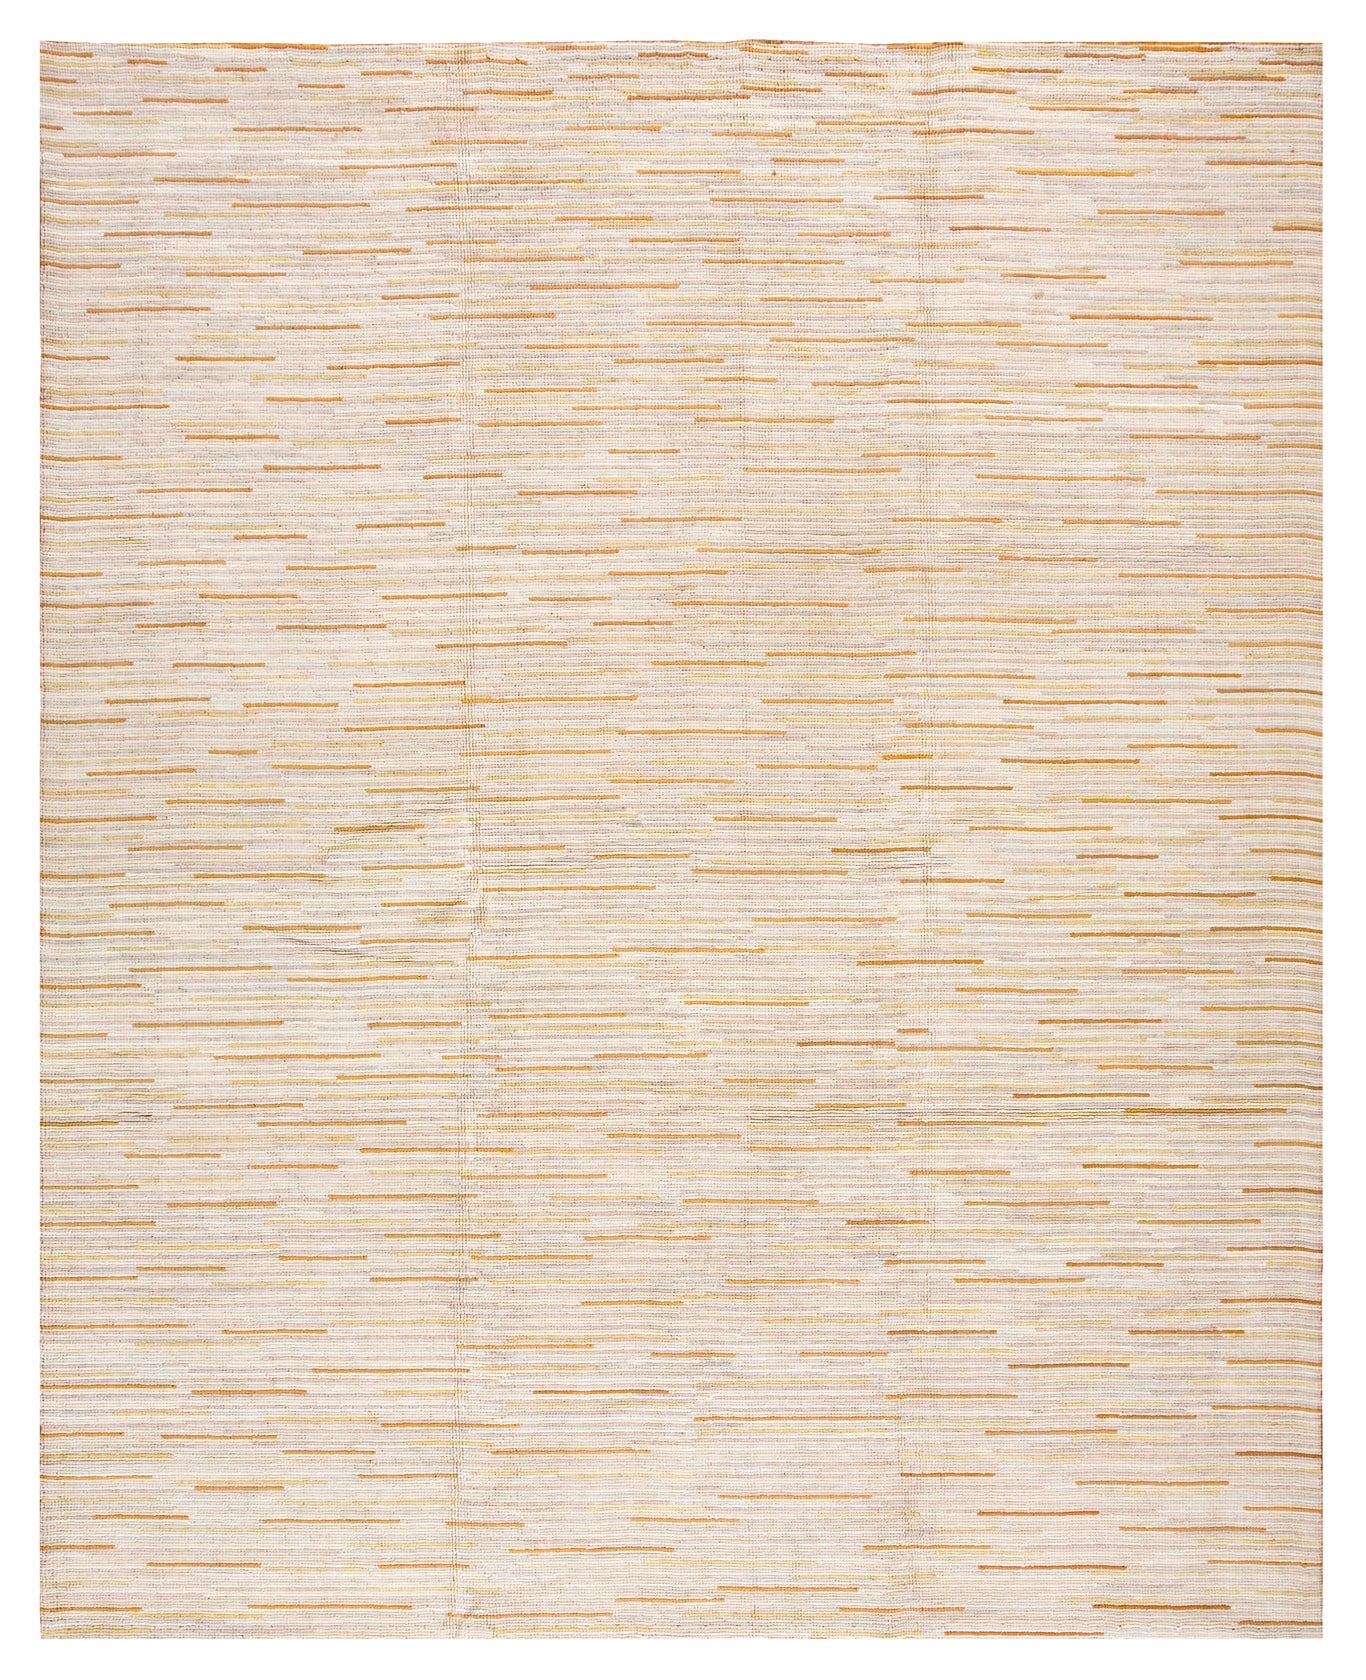 Contemporary American Cotton Hooked Rug 6' 0" x 9' 0" (183 x 274 cm) For Sale